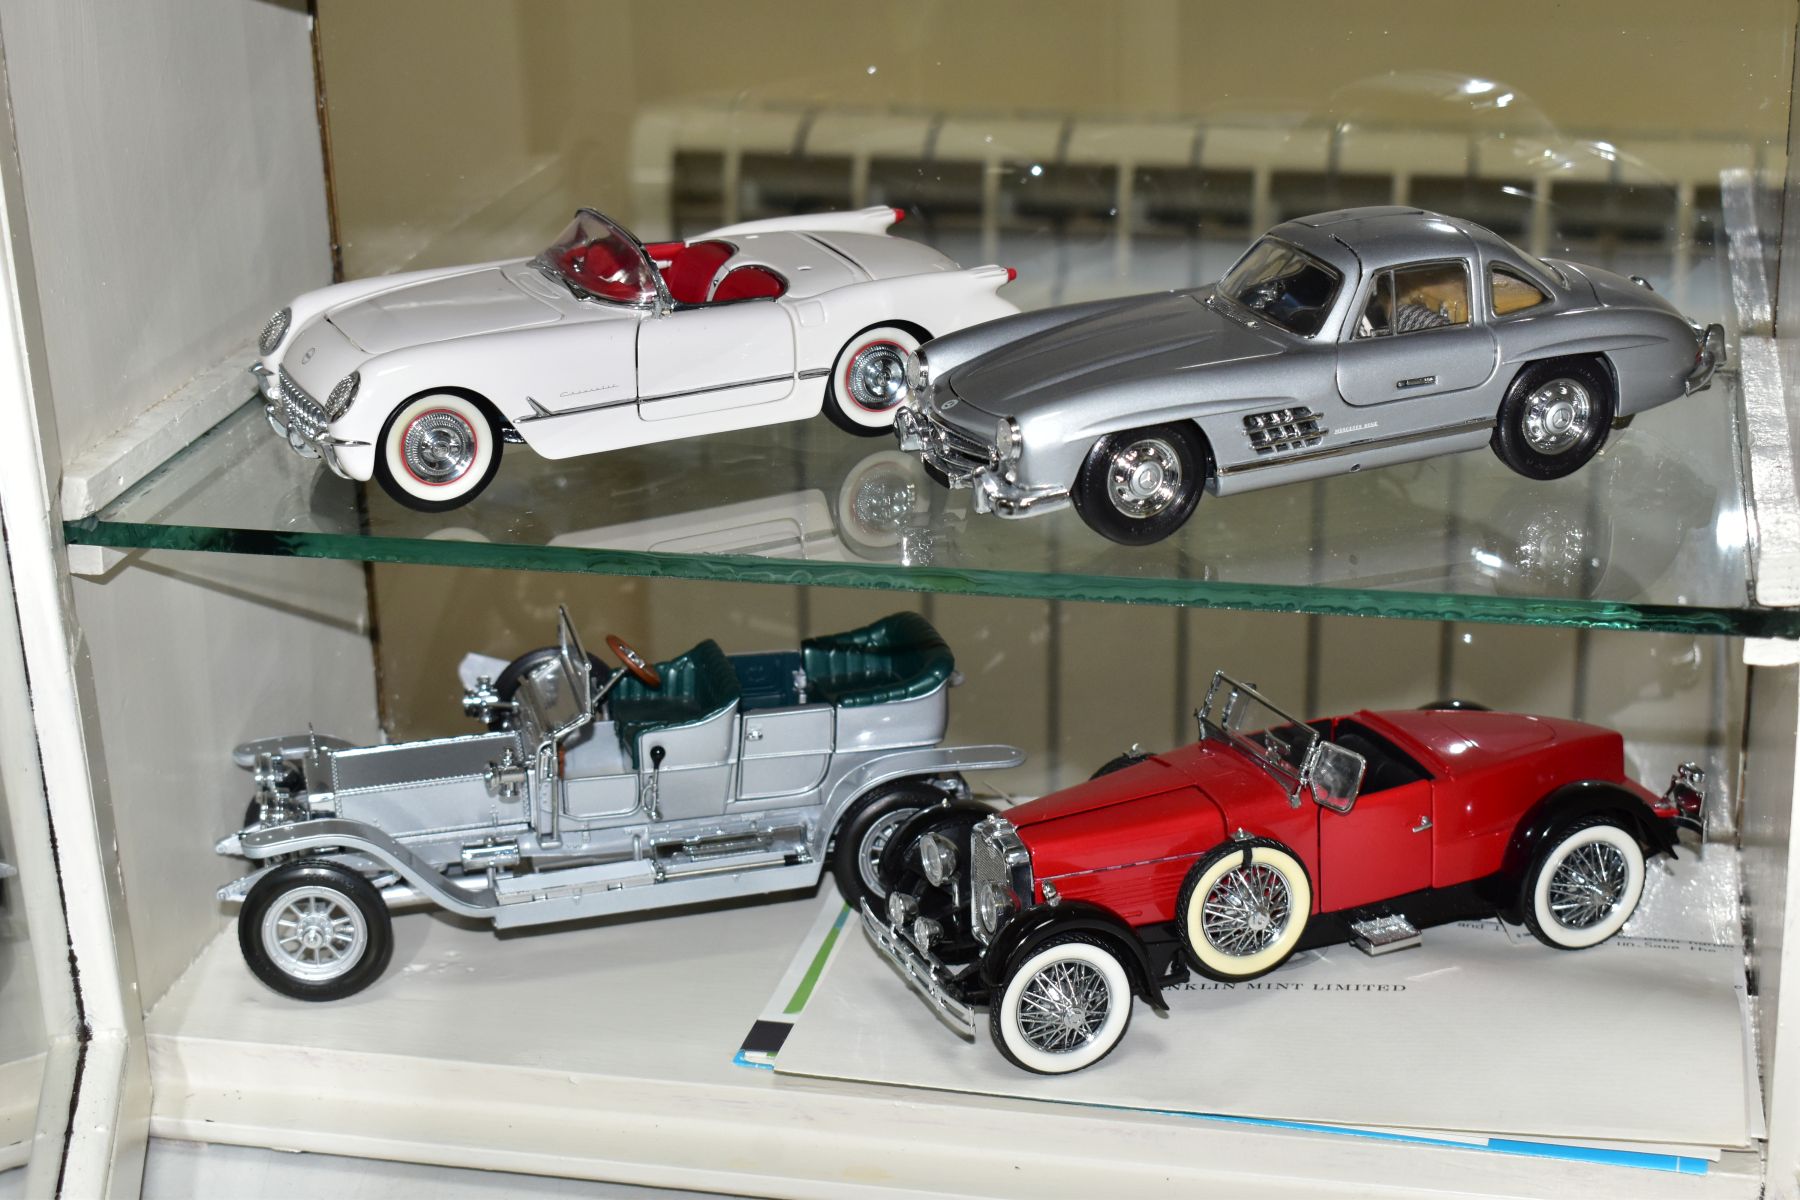 FOUR UNBOXED FRANKLIN MINT DIECAST CAR MODELS, 1/24 scale, 1907 Rolls-Royce Silver Ghost, 928 - Image 2 of 4